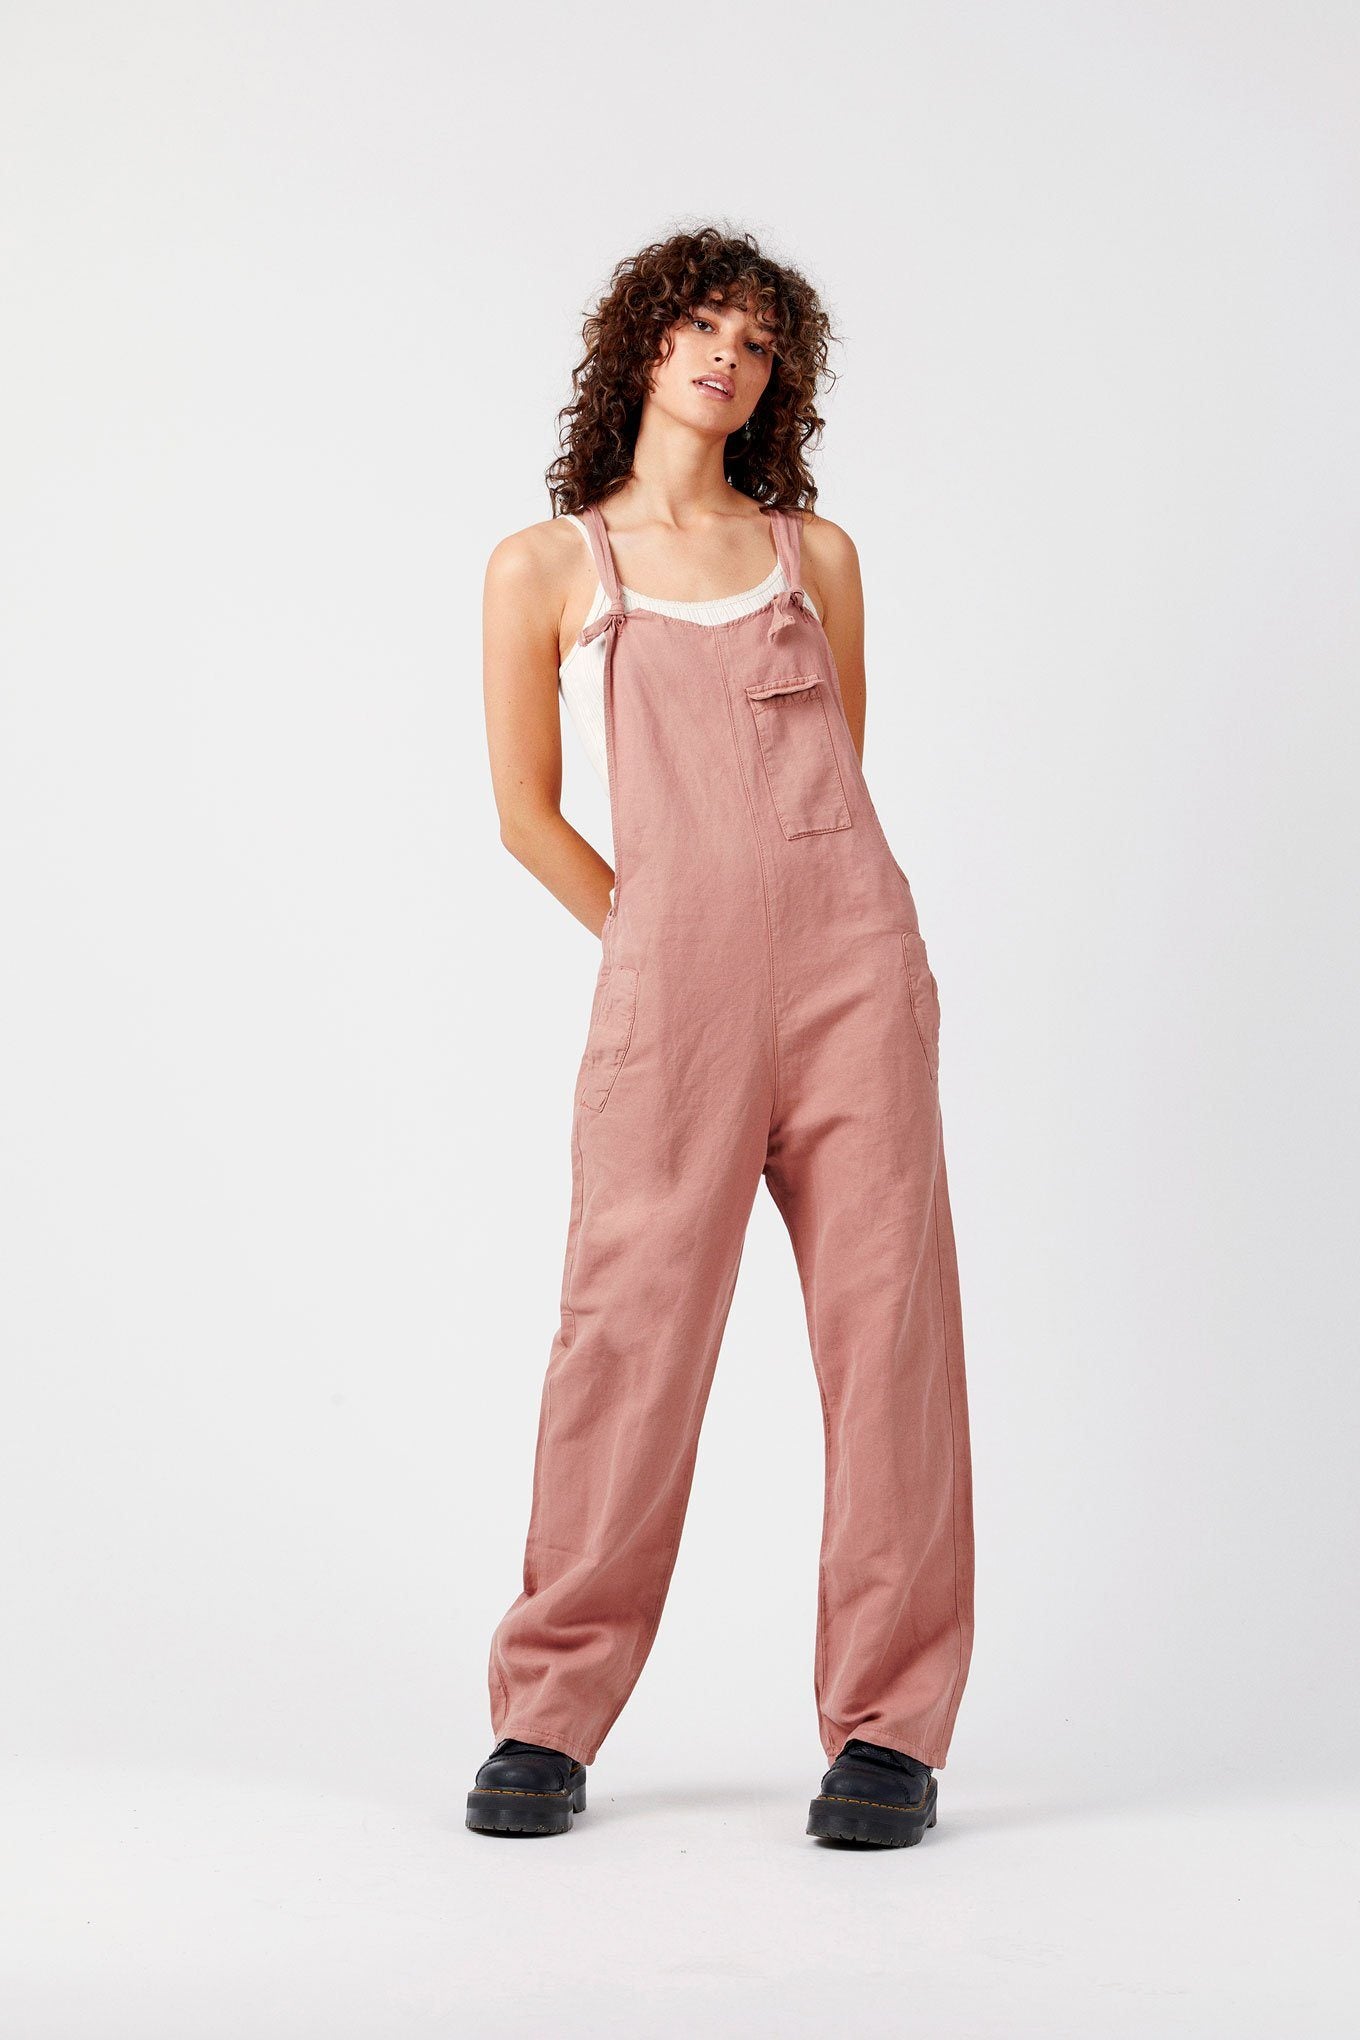 MARY-LOU Pink - GOTS Organic Cotton Dungarees by Flax & Loom, SIZE 2 / UK 10 / EUR 38